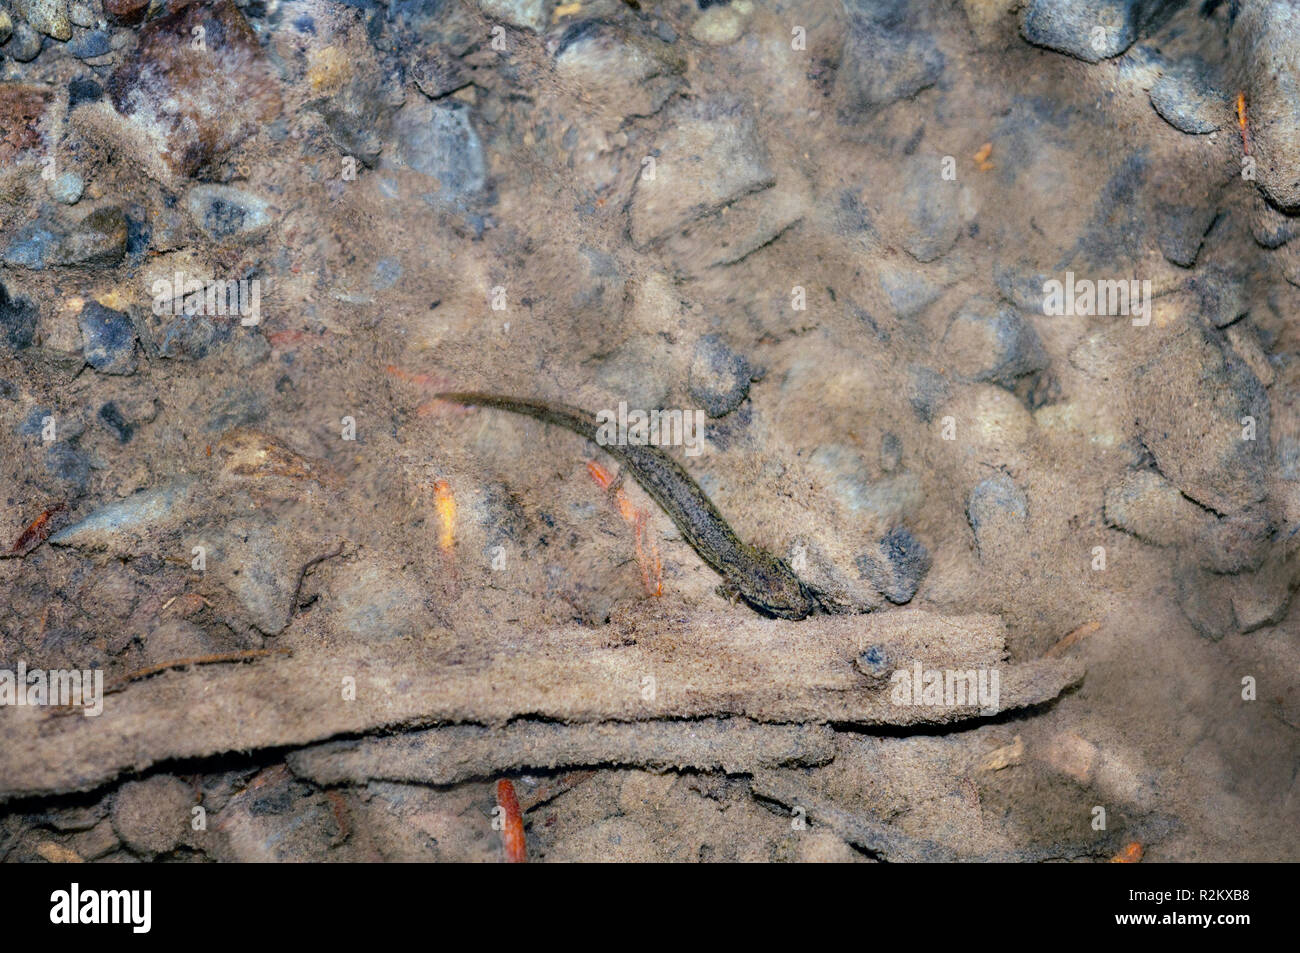 A salamander or newt as seen in the rocky bottom of a pond Stock Photo